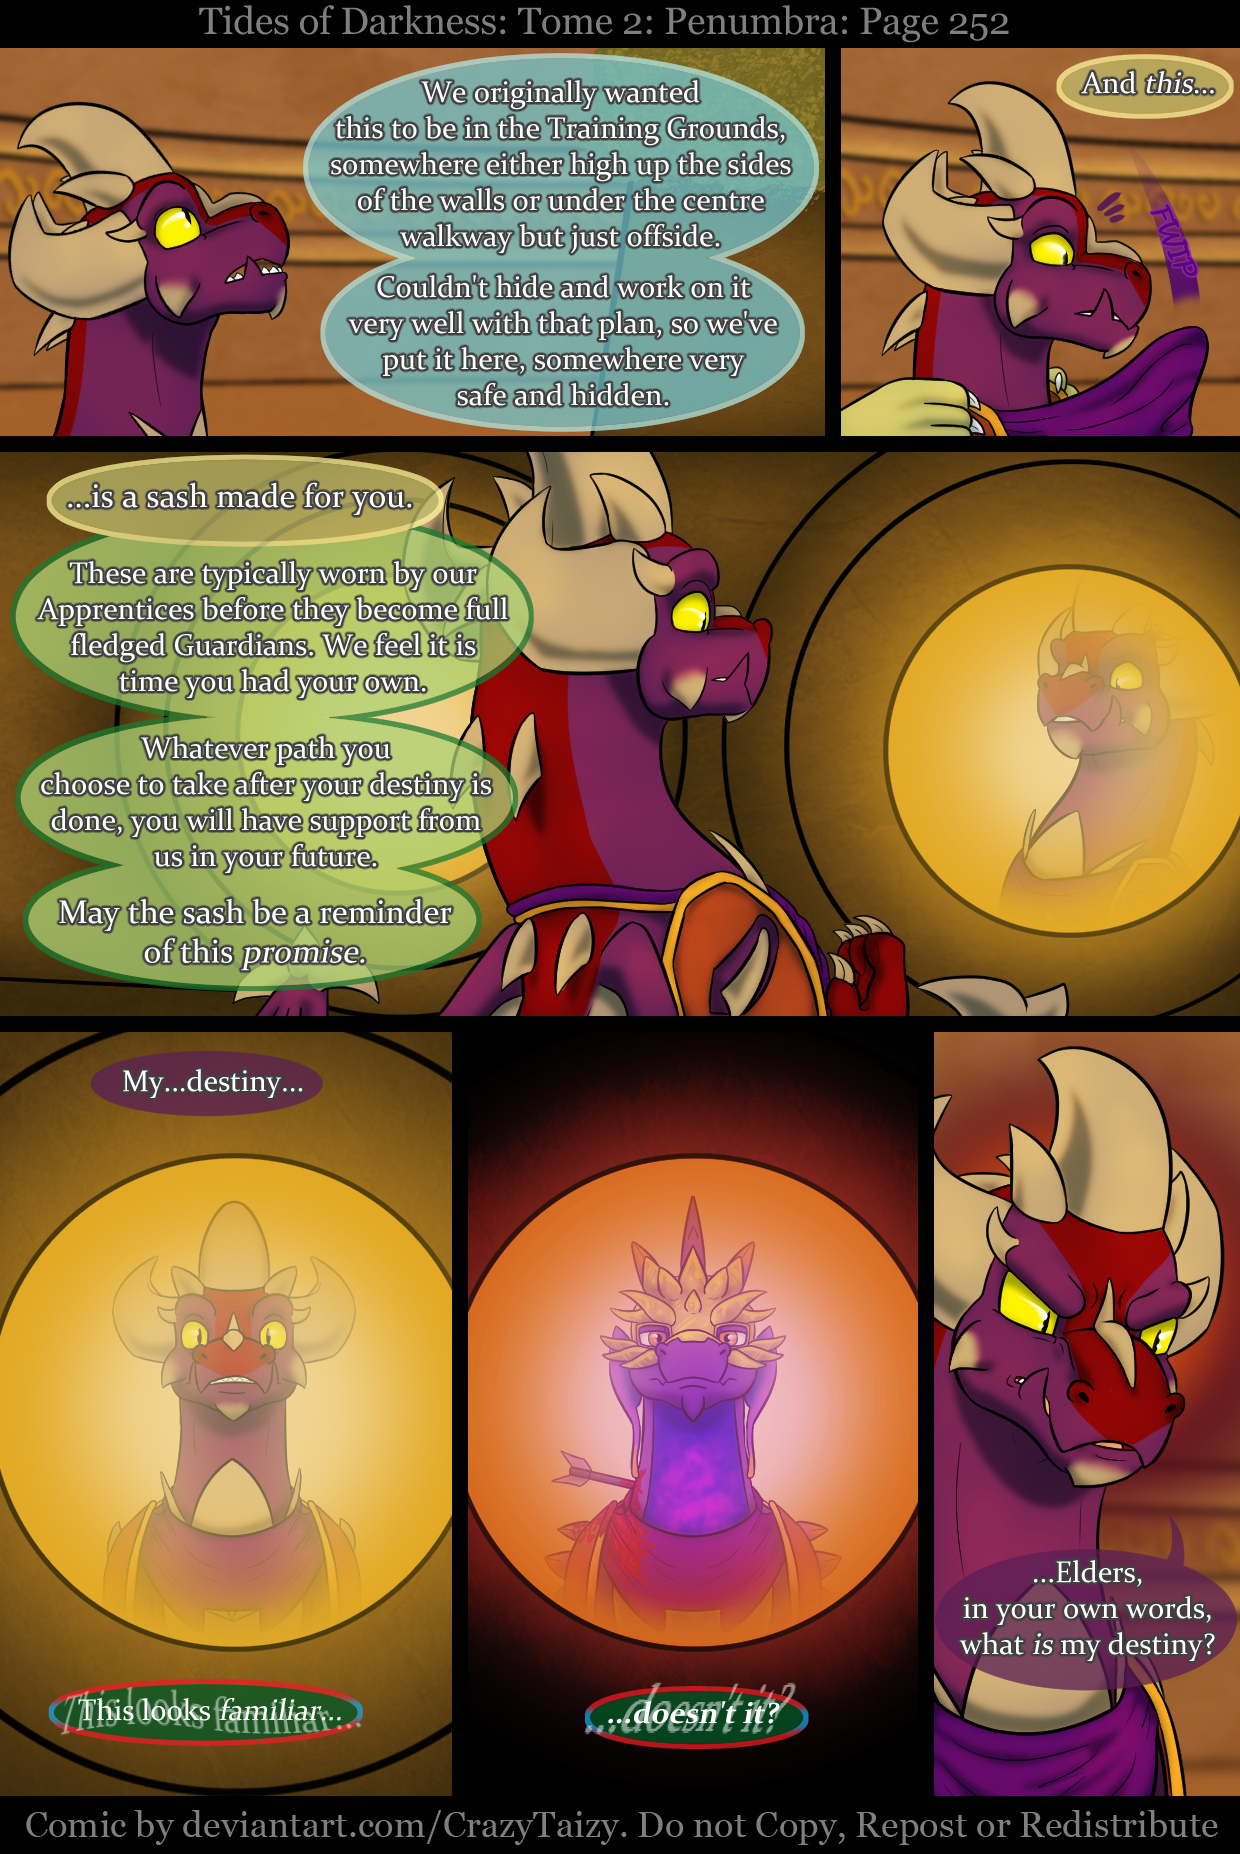 Tides of Darkness: Penumbra Page 252